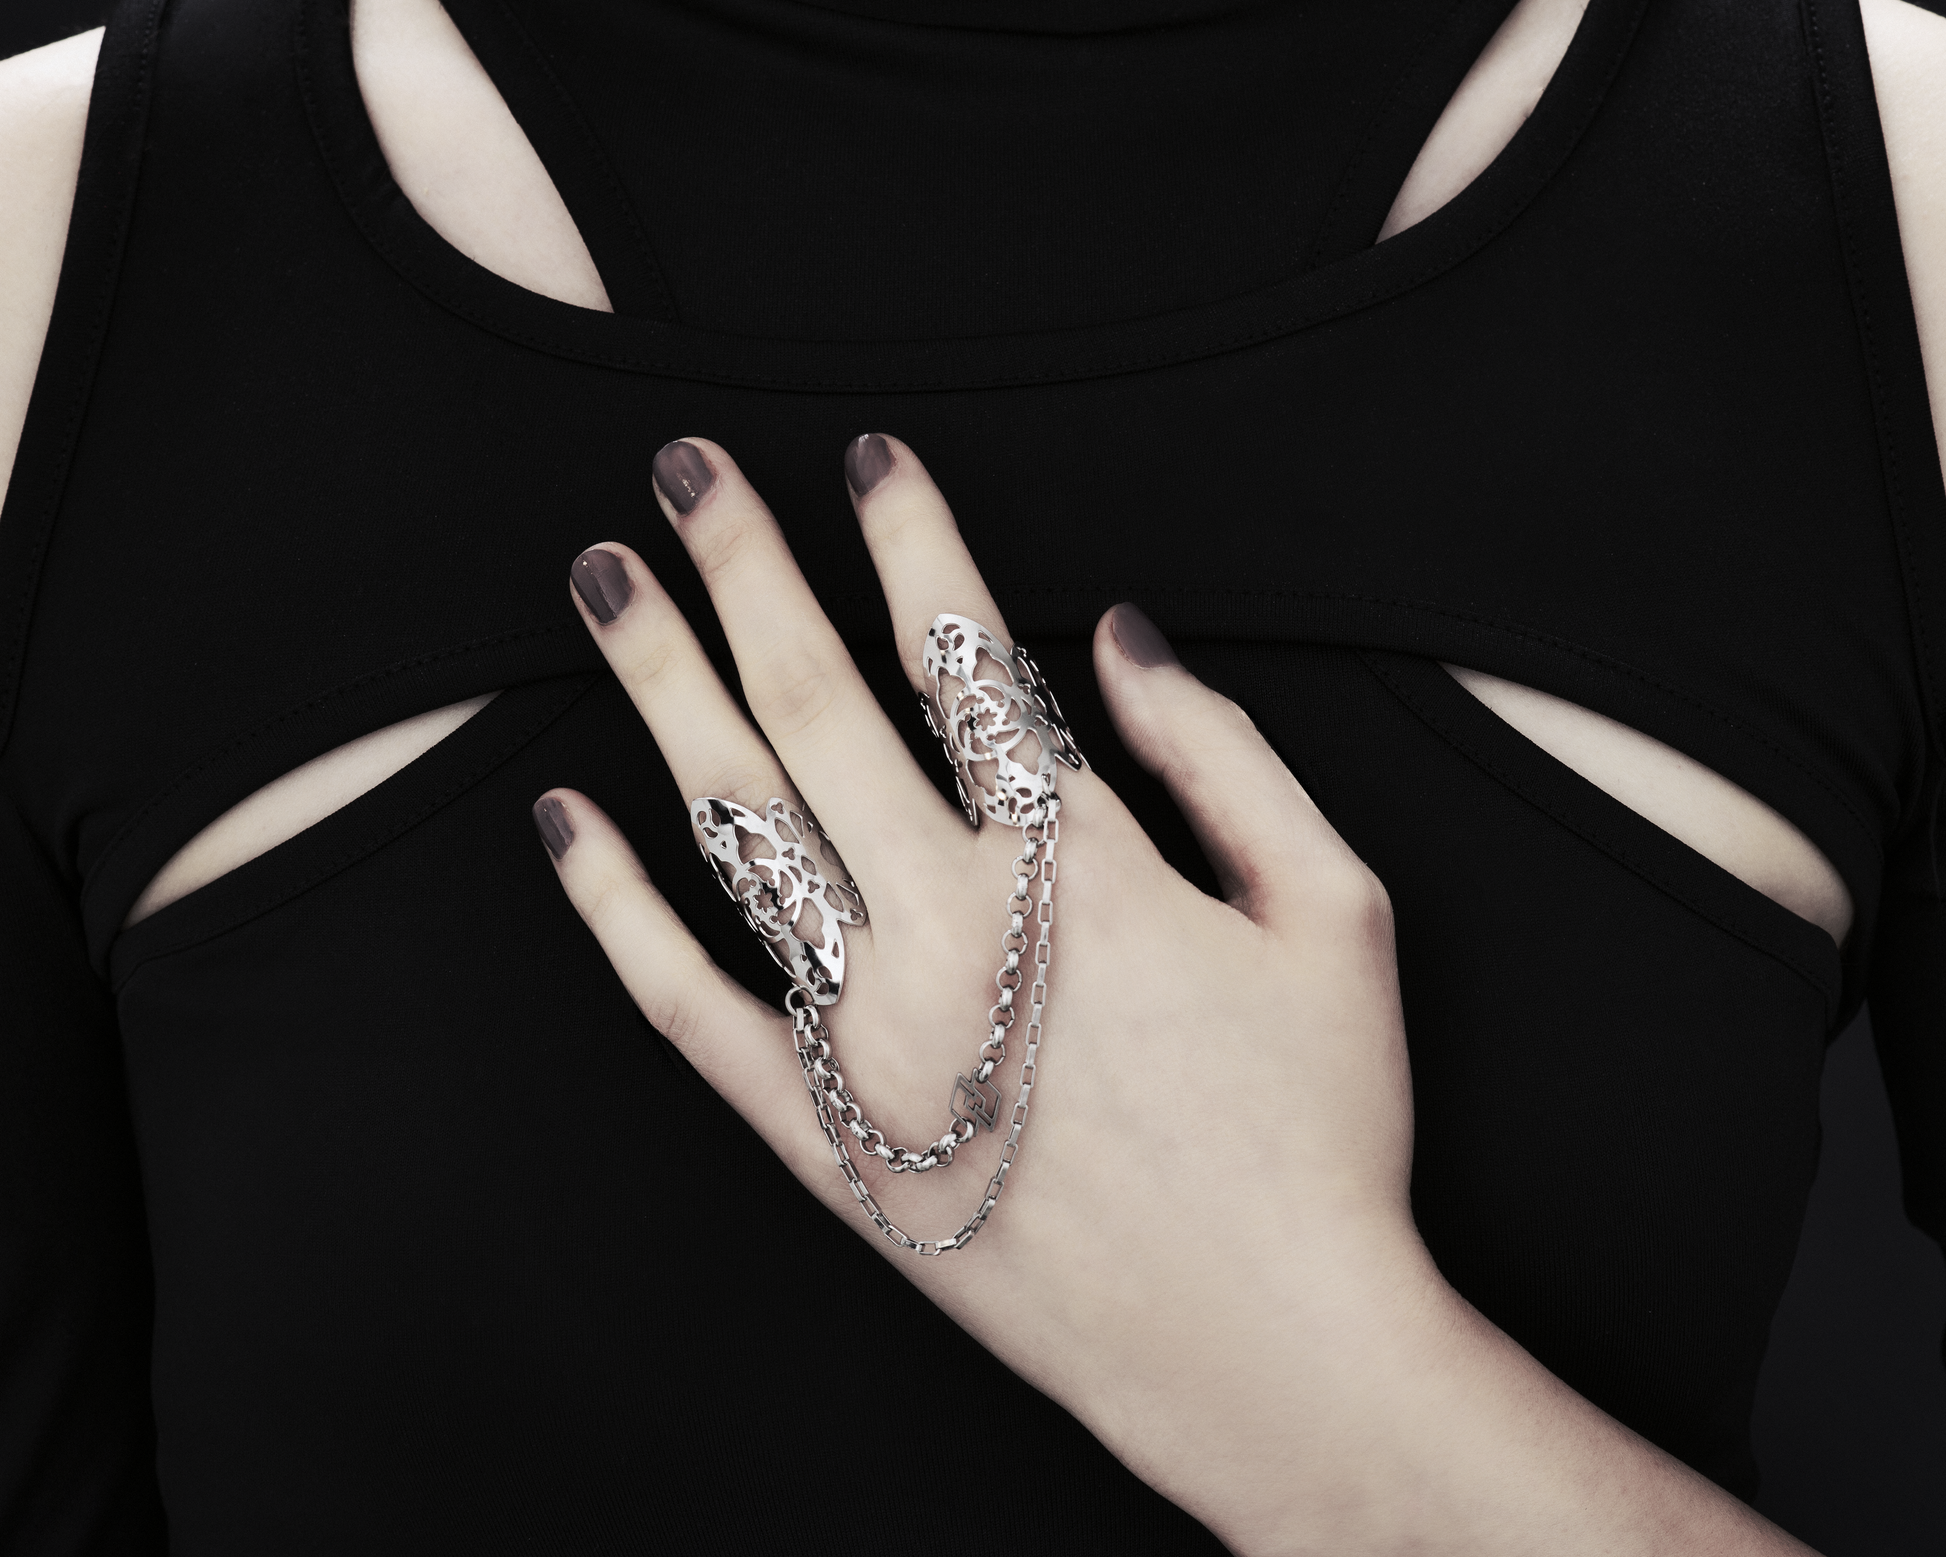 A hand models Myril Jewels' handcrafted ring featuring elaborate cut-out designs that echo a gothic architectural aesthetic, suited for lovers of dark-avantgarde fashion. The rings are interconnected with sleek chains, creating a bold, edgy look. This collection exemplifies the Italian craftsmanship and innovative style synonymous with the Myril Jewels brand, catering to the tastes of the alternative and gothic jewelry community.